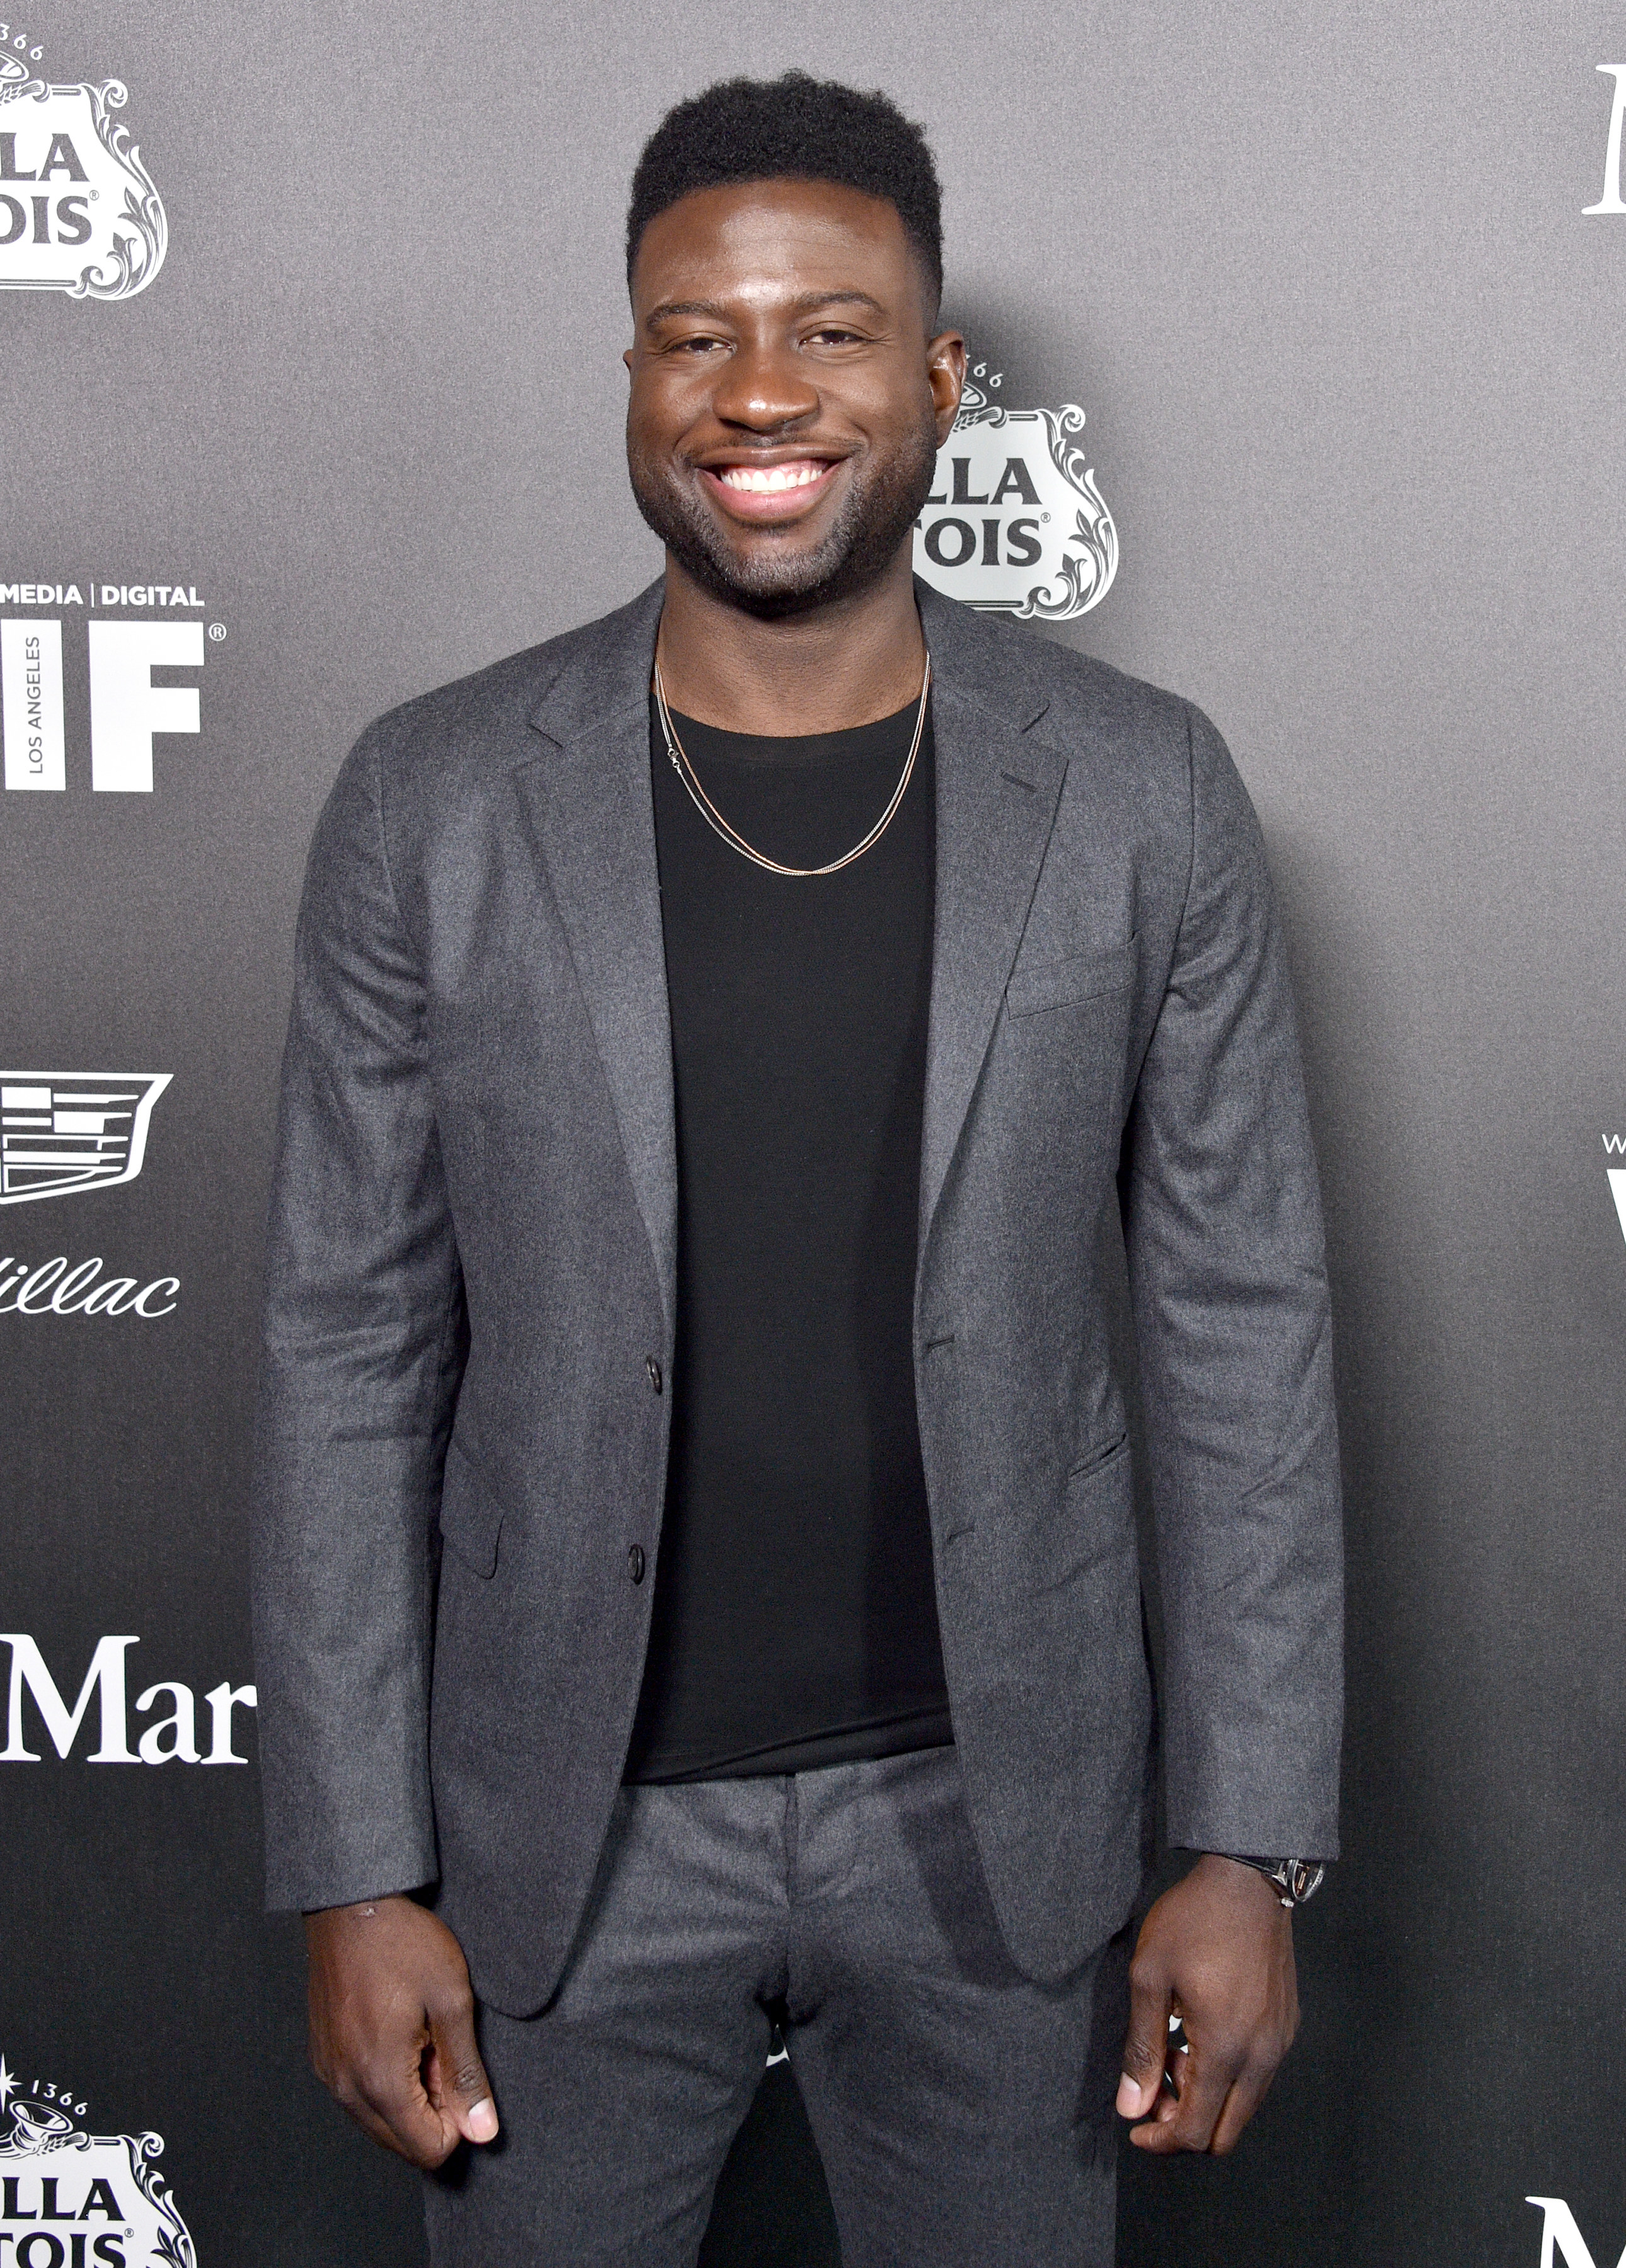 Sinqua Walls attends the 13th Annual Women In Film Female Oscar Nominees Party at Sunset Room Hollywood on February 07, 2020 in Hollywood, California.